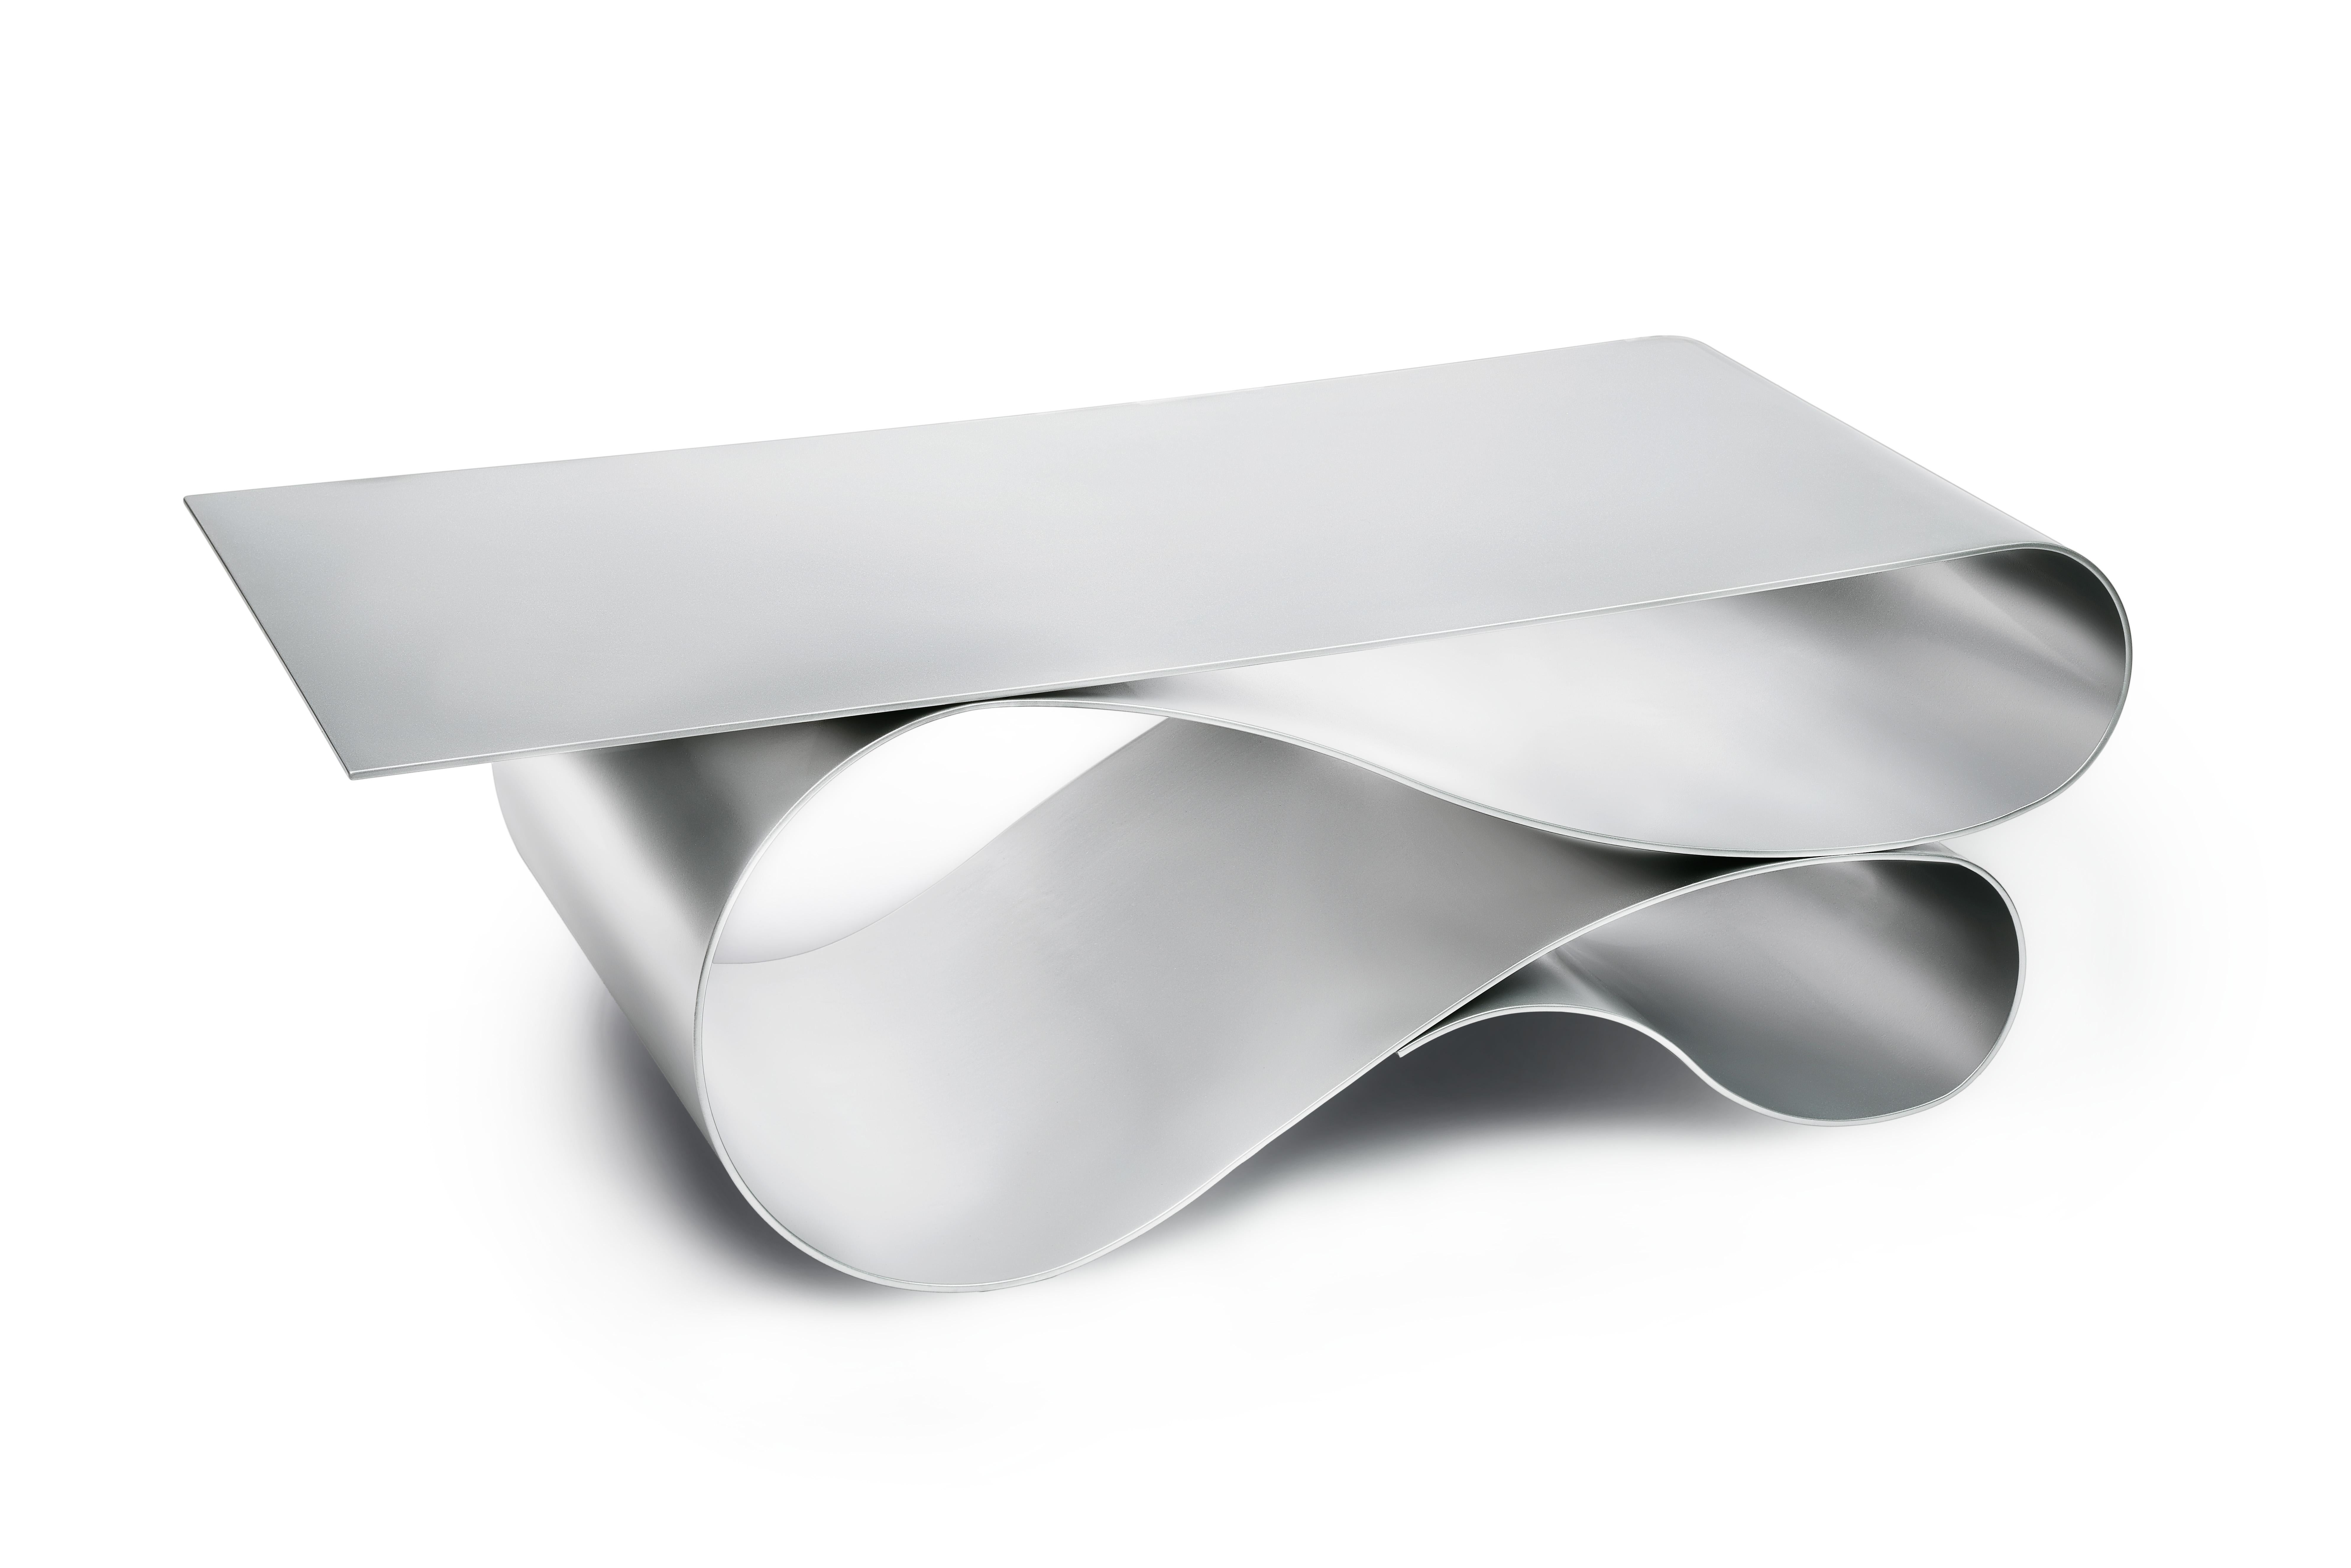 The iconic lyrical form of the award winning Whorl coffee table series this time executed in powder coated aluminum. 1/4